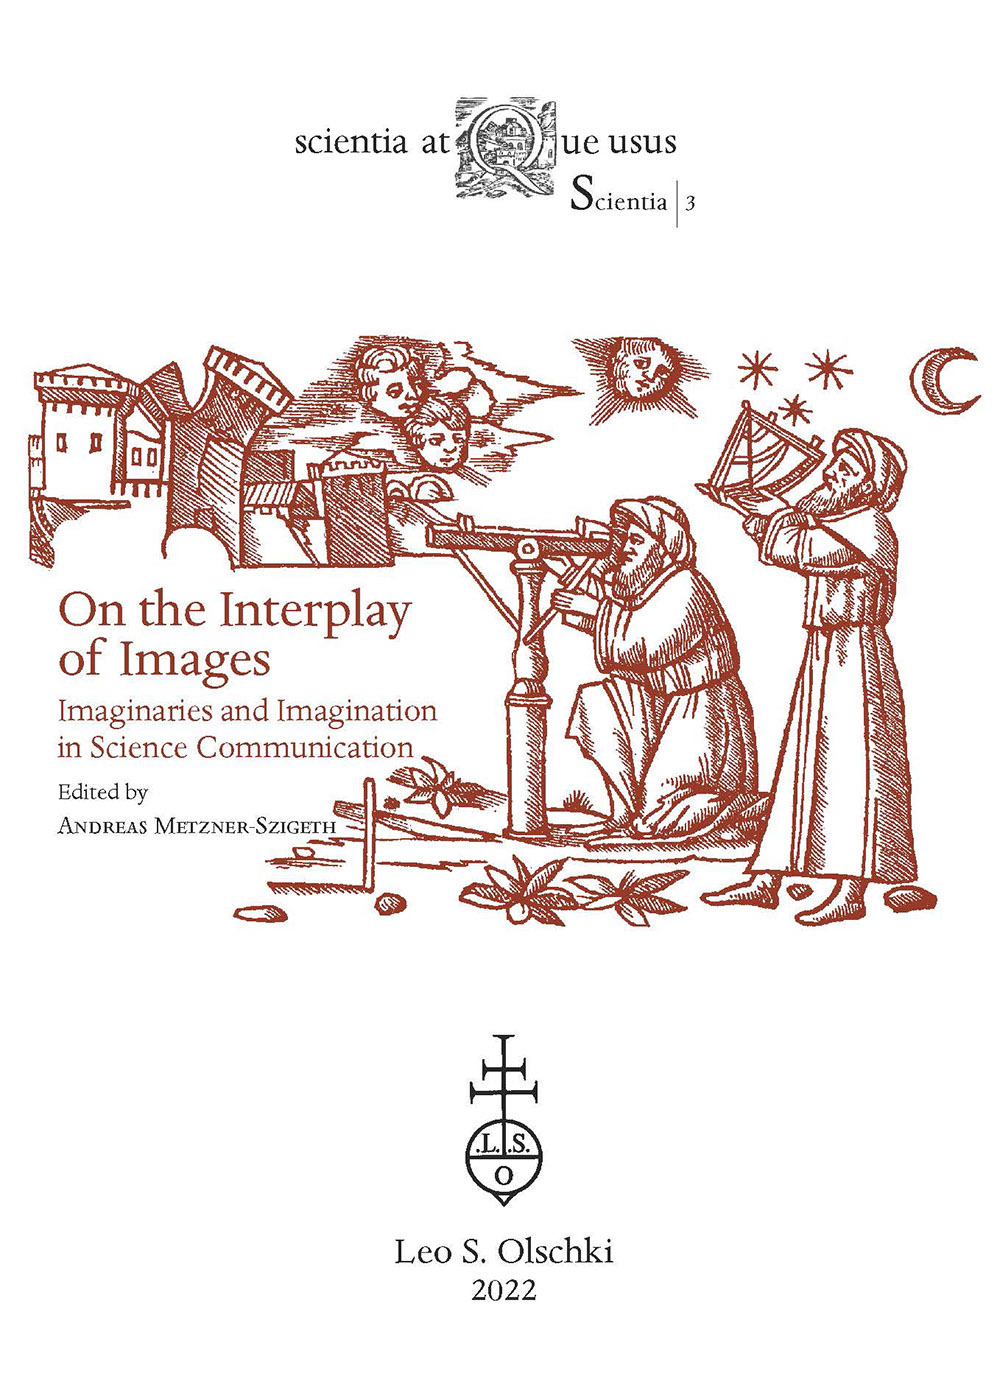 On the interplay of images. Imaginaries and imagination in science communication